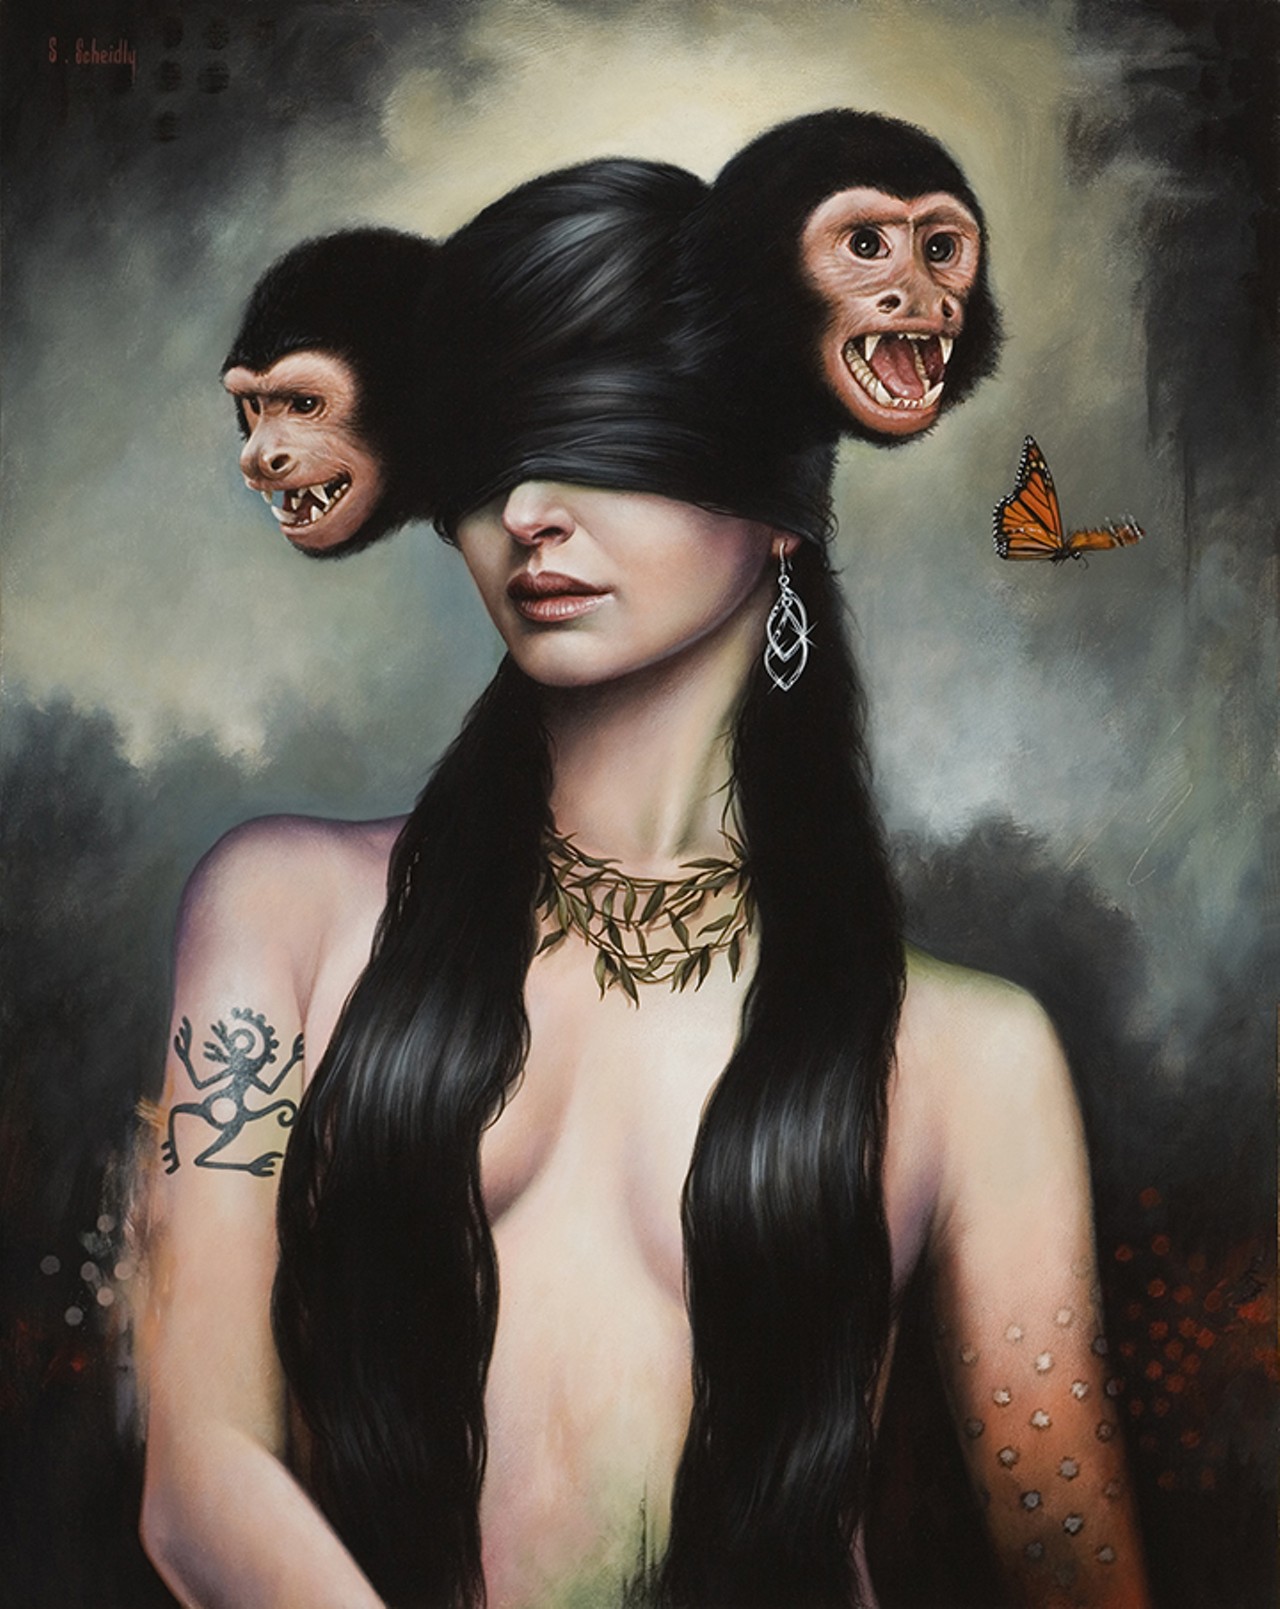 Opening Thursday, Dec. 15Artborne Annual at the Gallery at Avalon Island"Monkey Queen" by Scott Scheidly